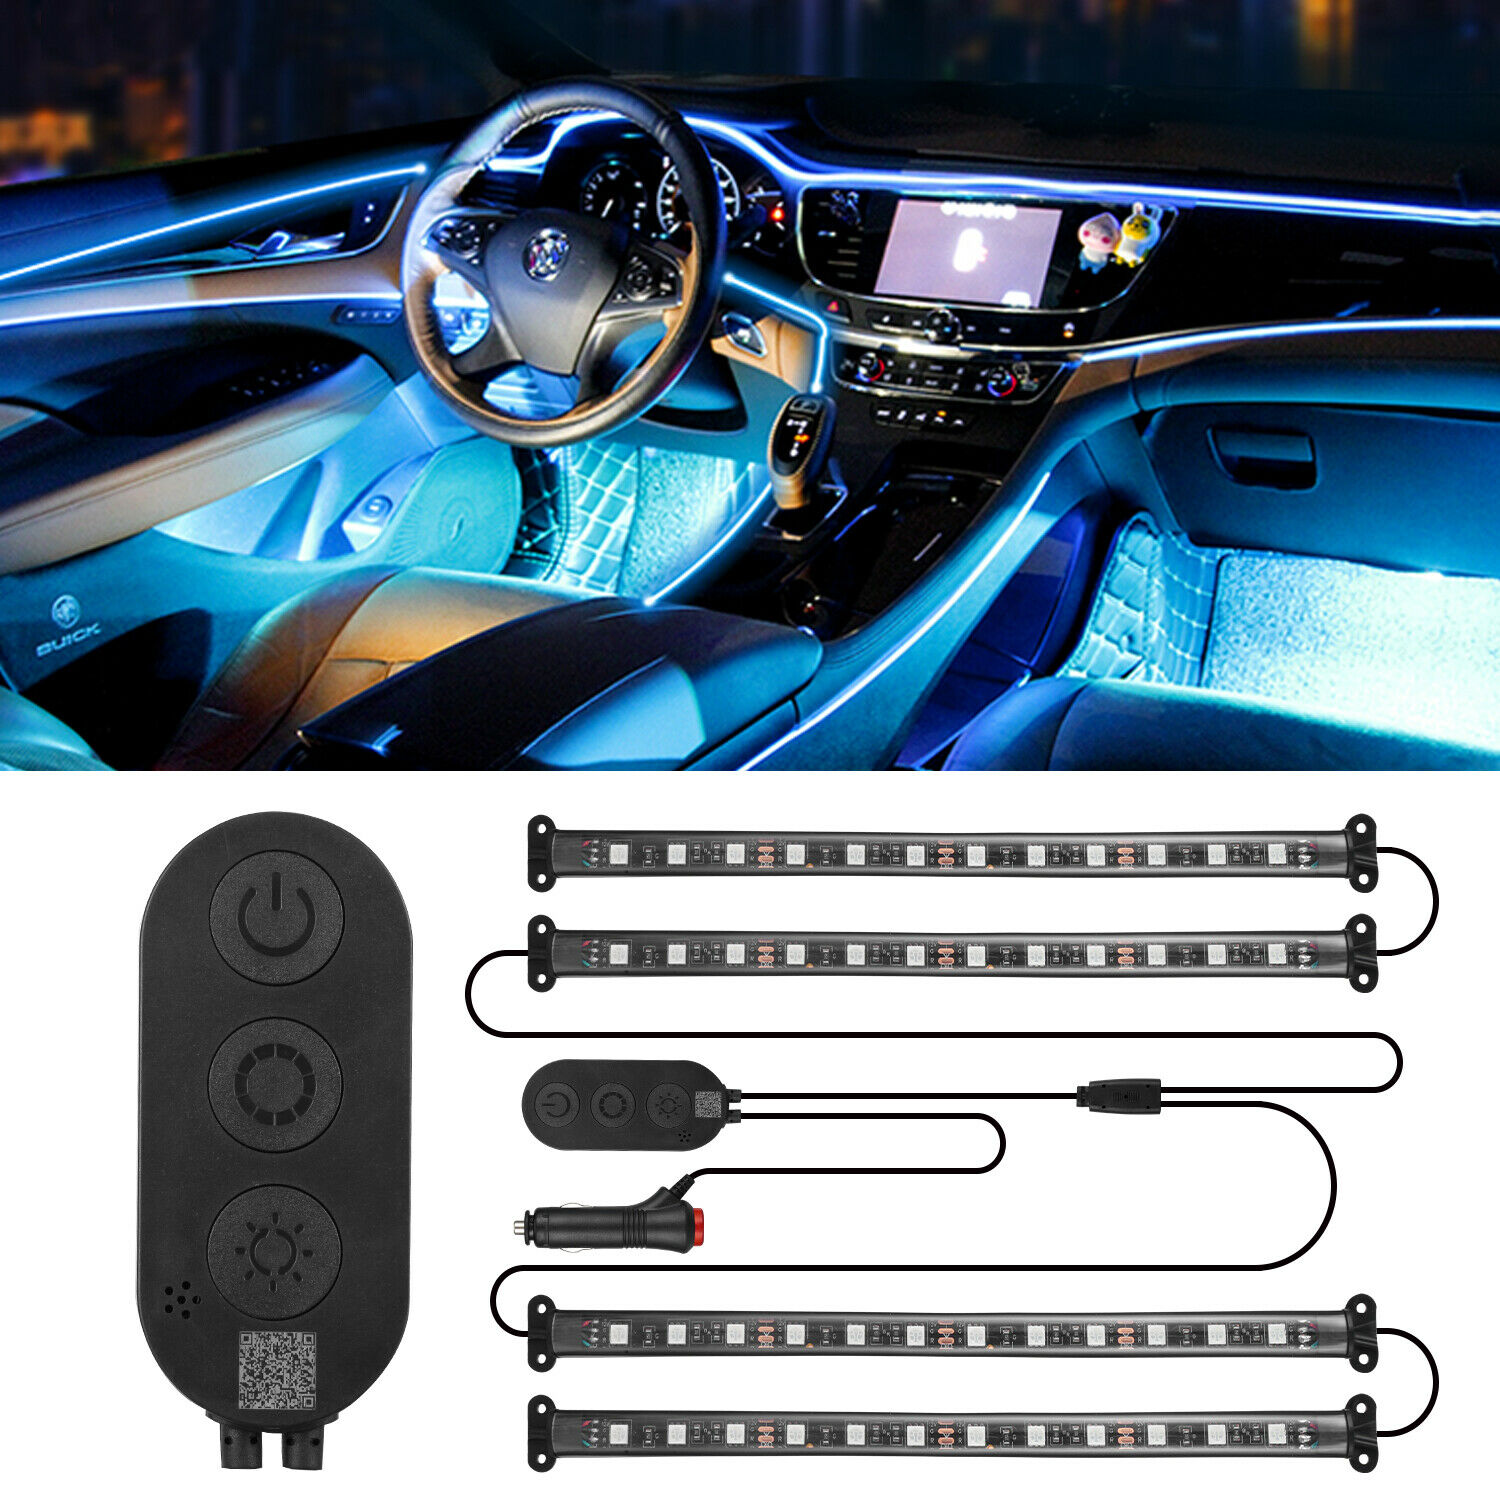 Unionlux Car LED Lights Smart Car Interior Lights with App Control, RGB Inside Car Lights with DIY Mode and Music Mode, 2 Lines Design LED Lights for Cars with Car Charger, DC 12V